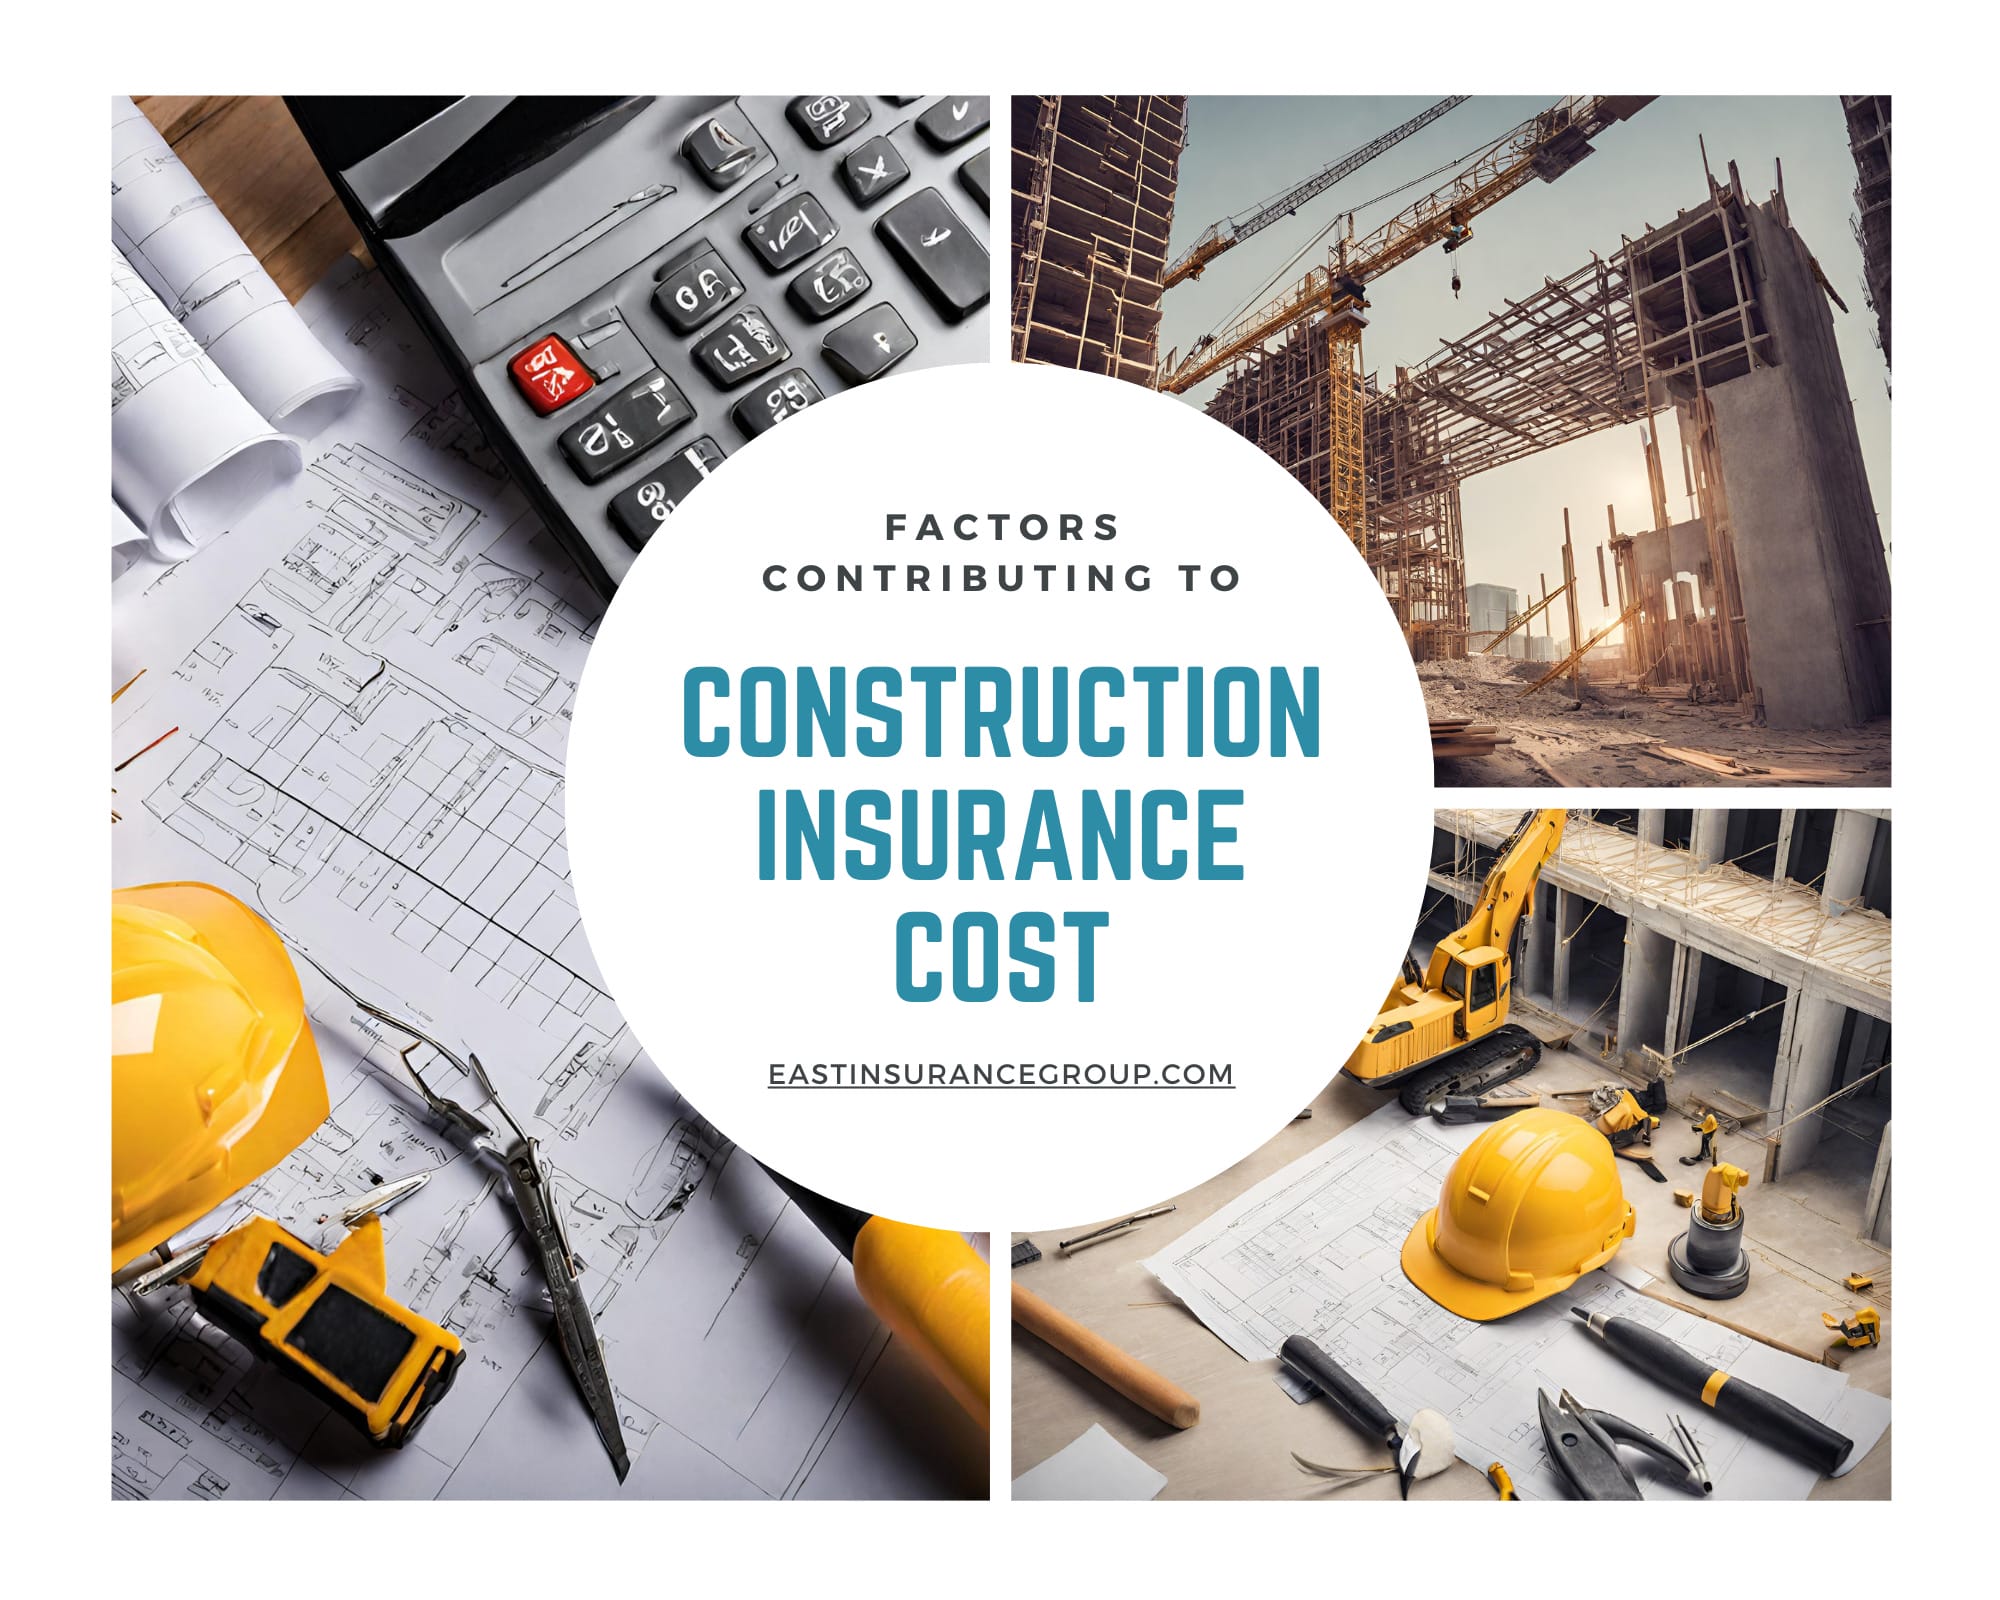 Construction insurance cost